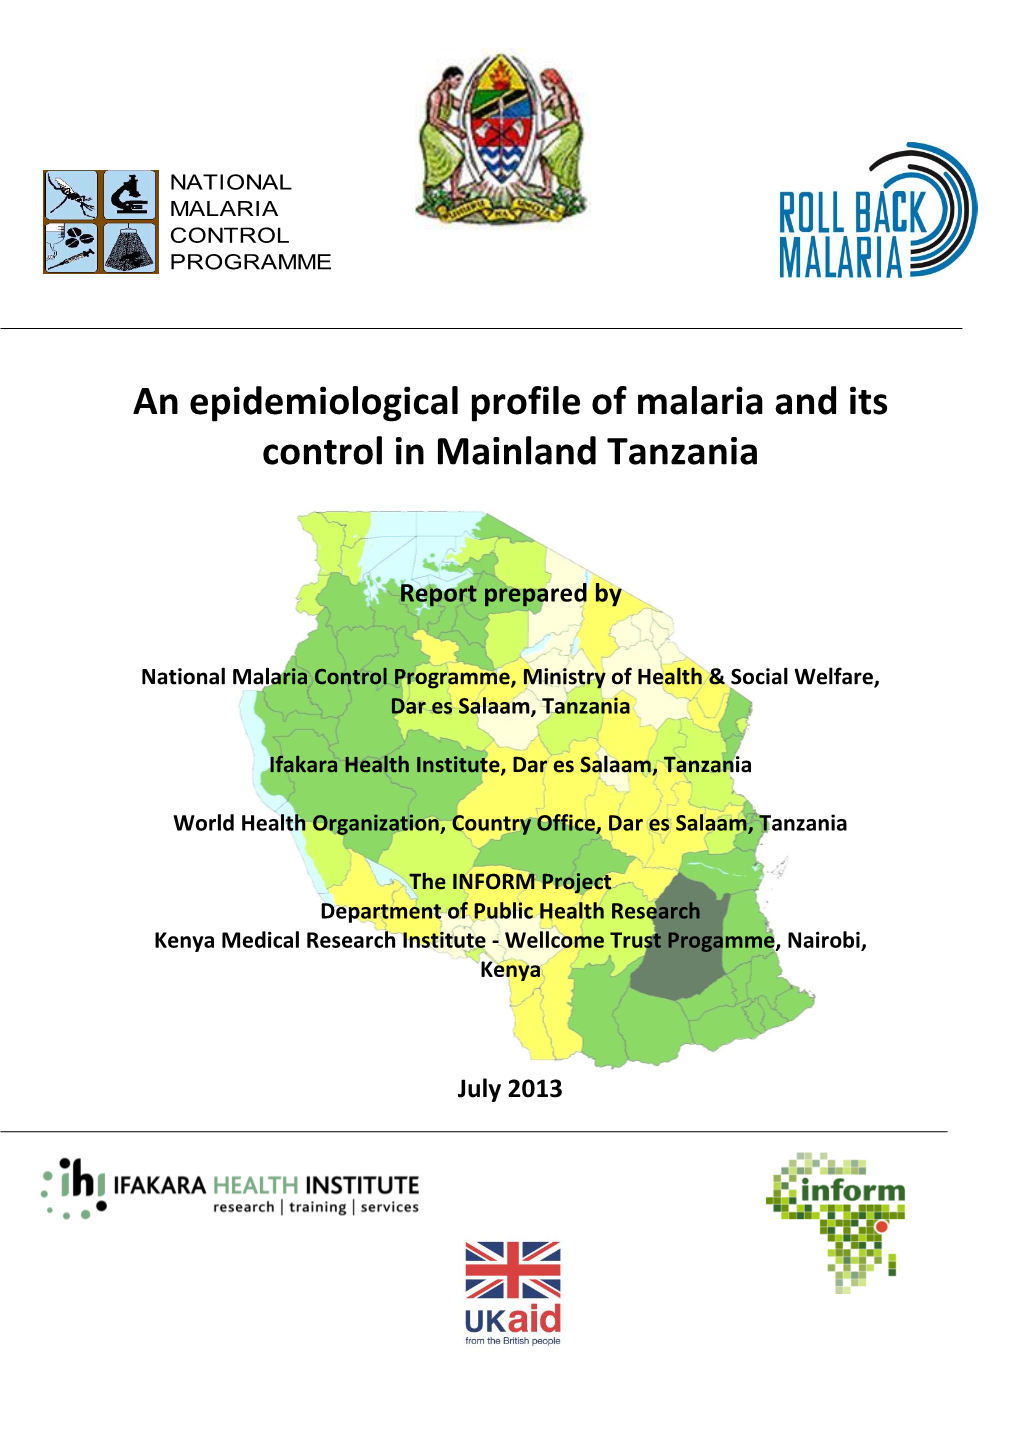 An Epidemiological Profile of Malaria and Its Control in Mainland Tanzania